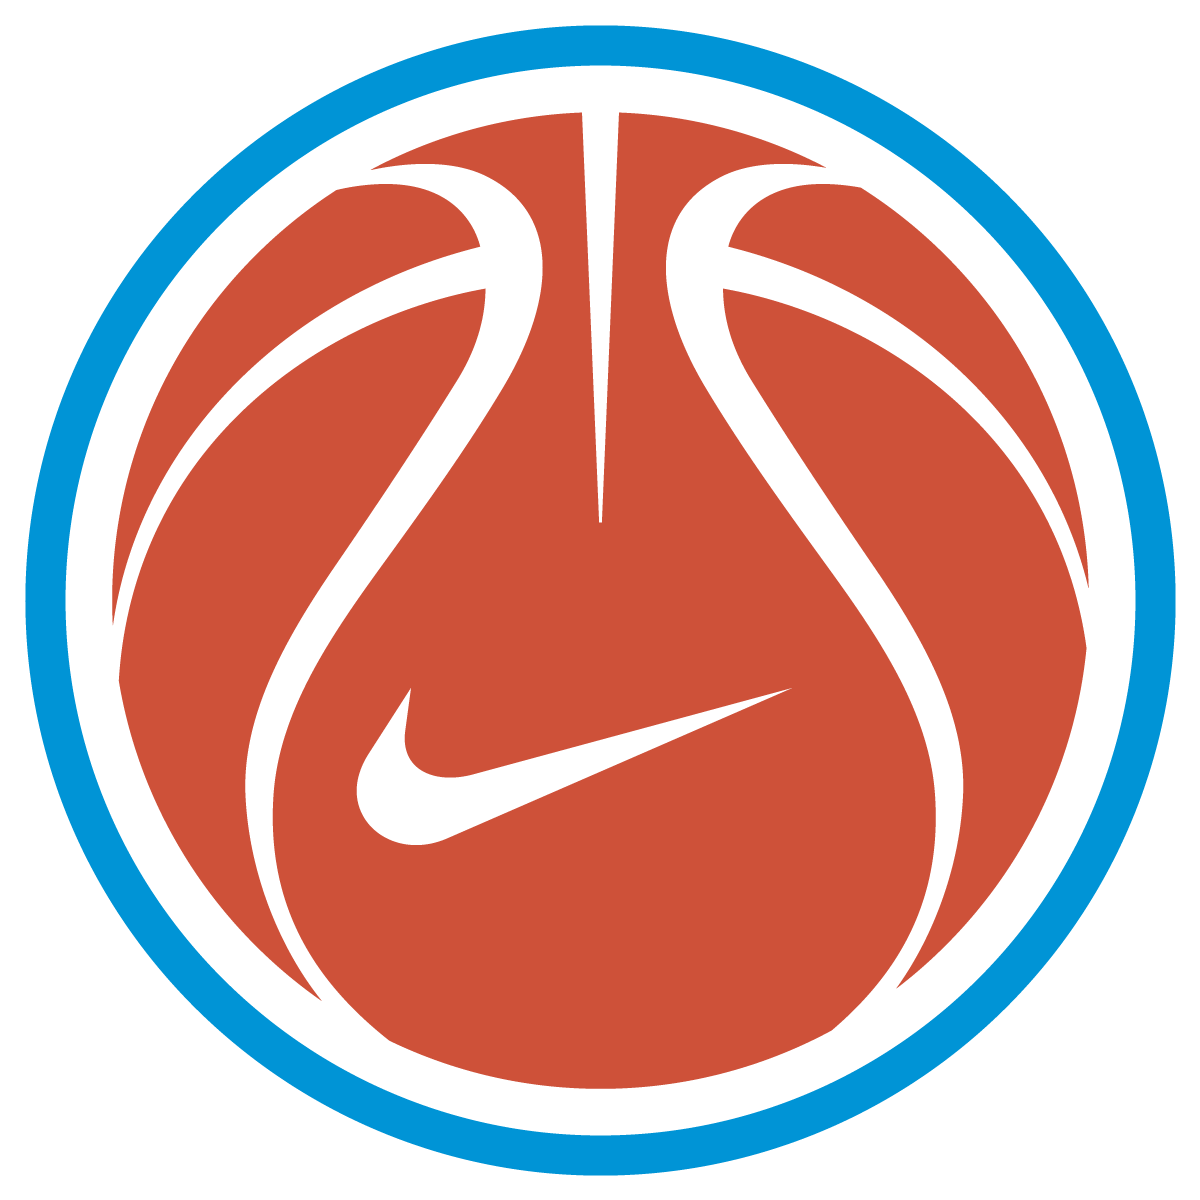 The best free Nike vector images. Download from 129 free vectors of ...